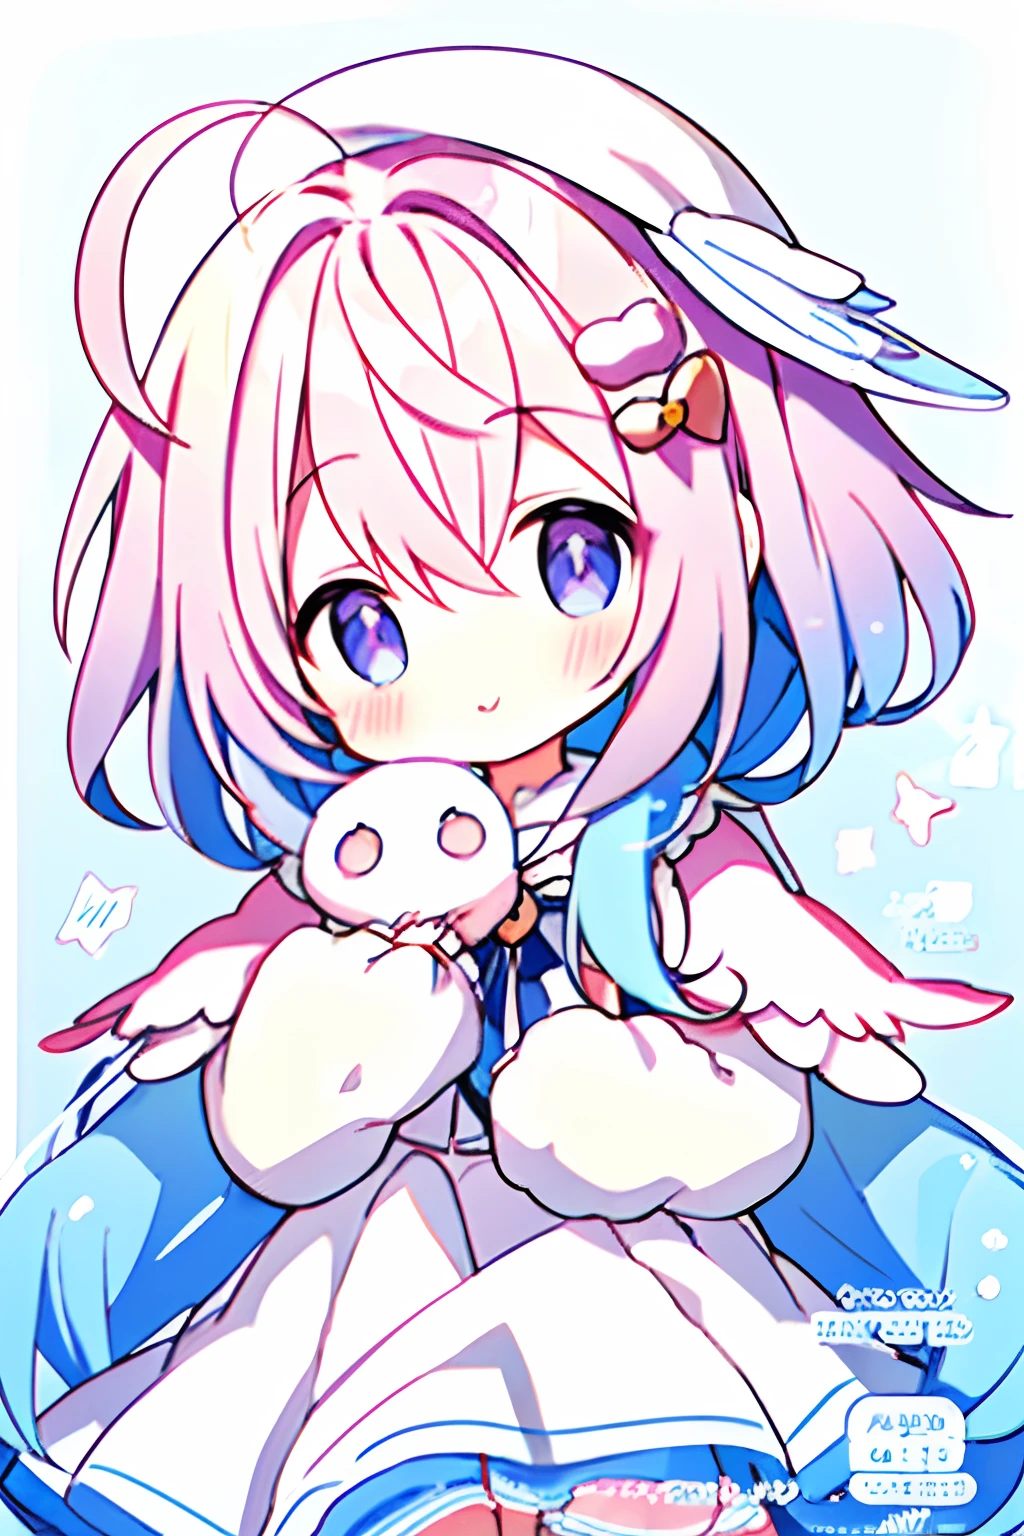 Anime girl with angel wings and heart in her hand, anime visual of a cute girl, Cute anime girl, Anime moe art style, small curvaceous loli, of an beautiful angel girl, angel girl, angelic purity, High quality anime art style, Cute anime, ahegao, Cute anime style, small  girl, Angelic, Splash art anime Loli, 